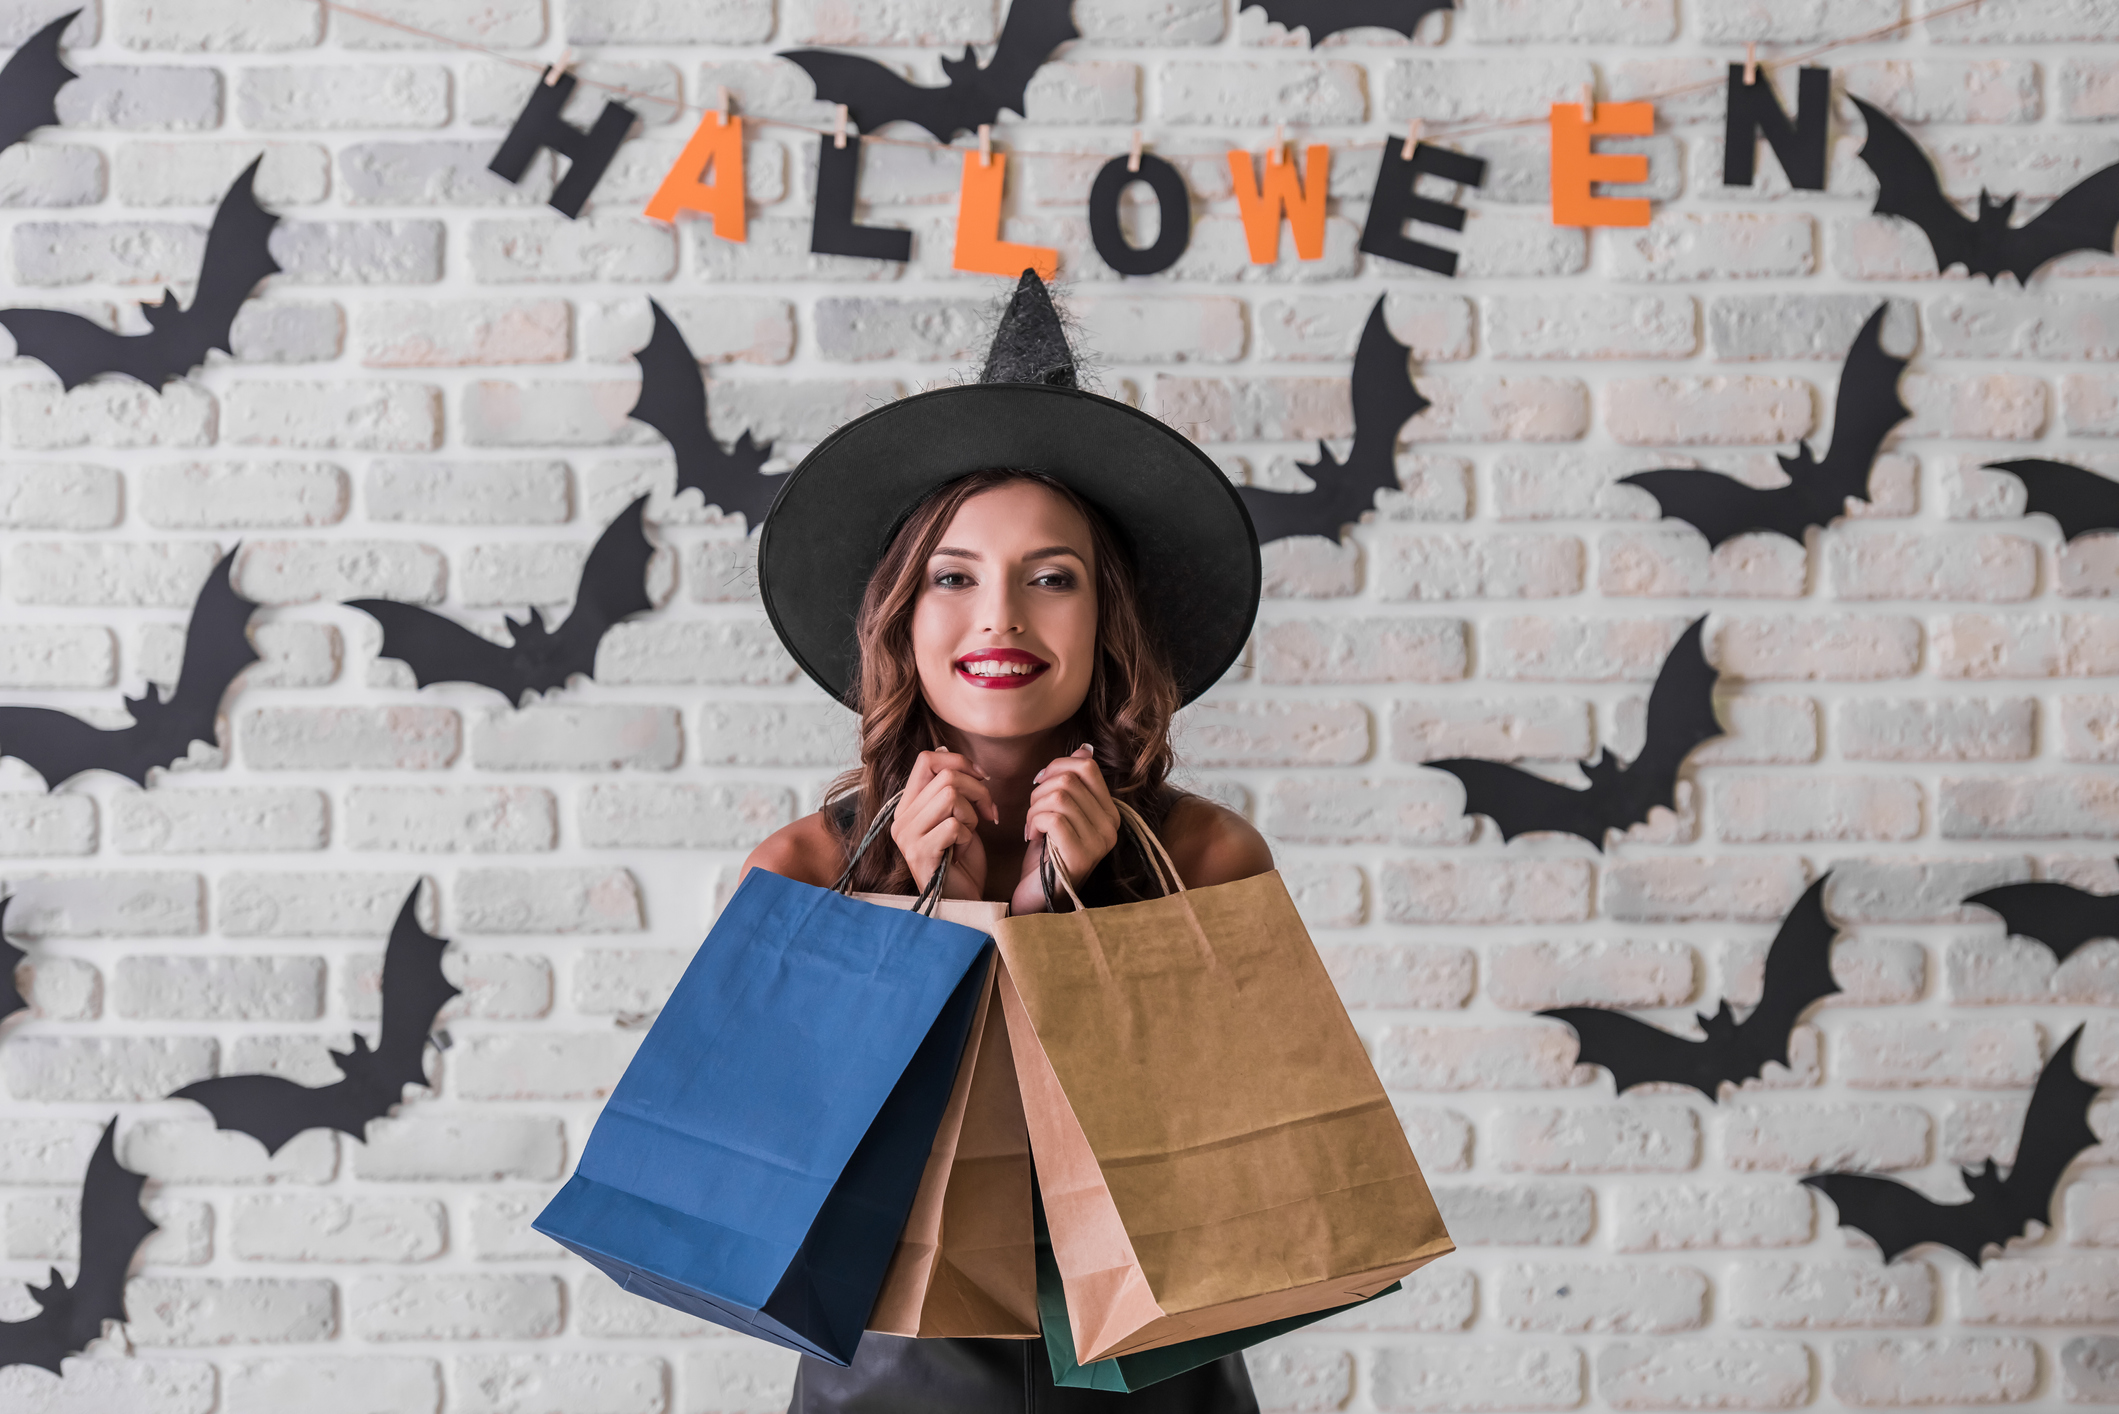 Enjoy Halloween 2021 in Garland with These Family Activities at Northstar Plaza